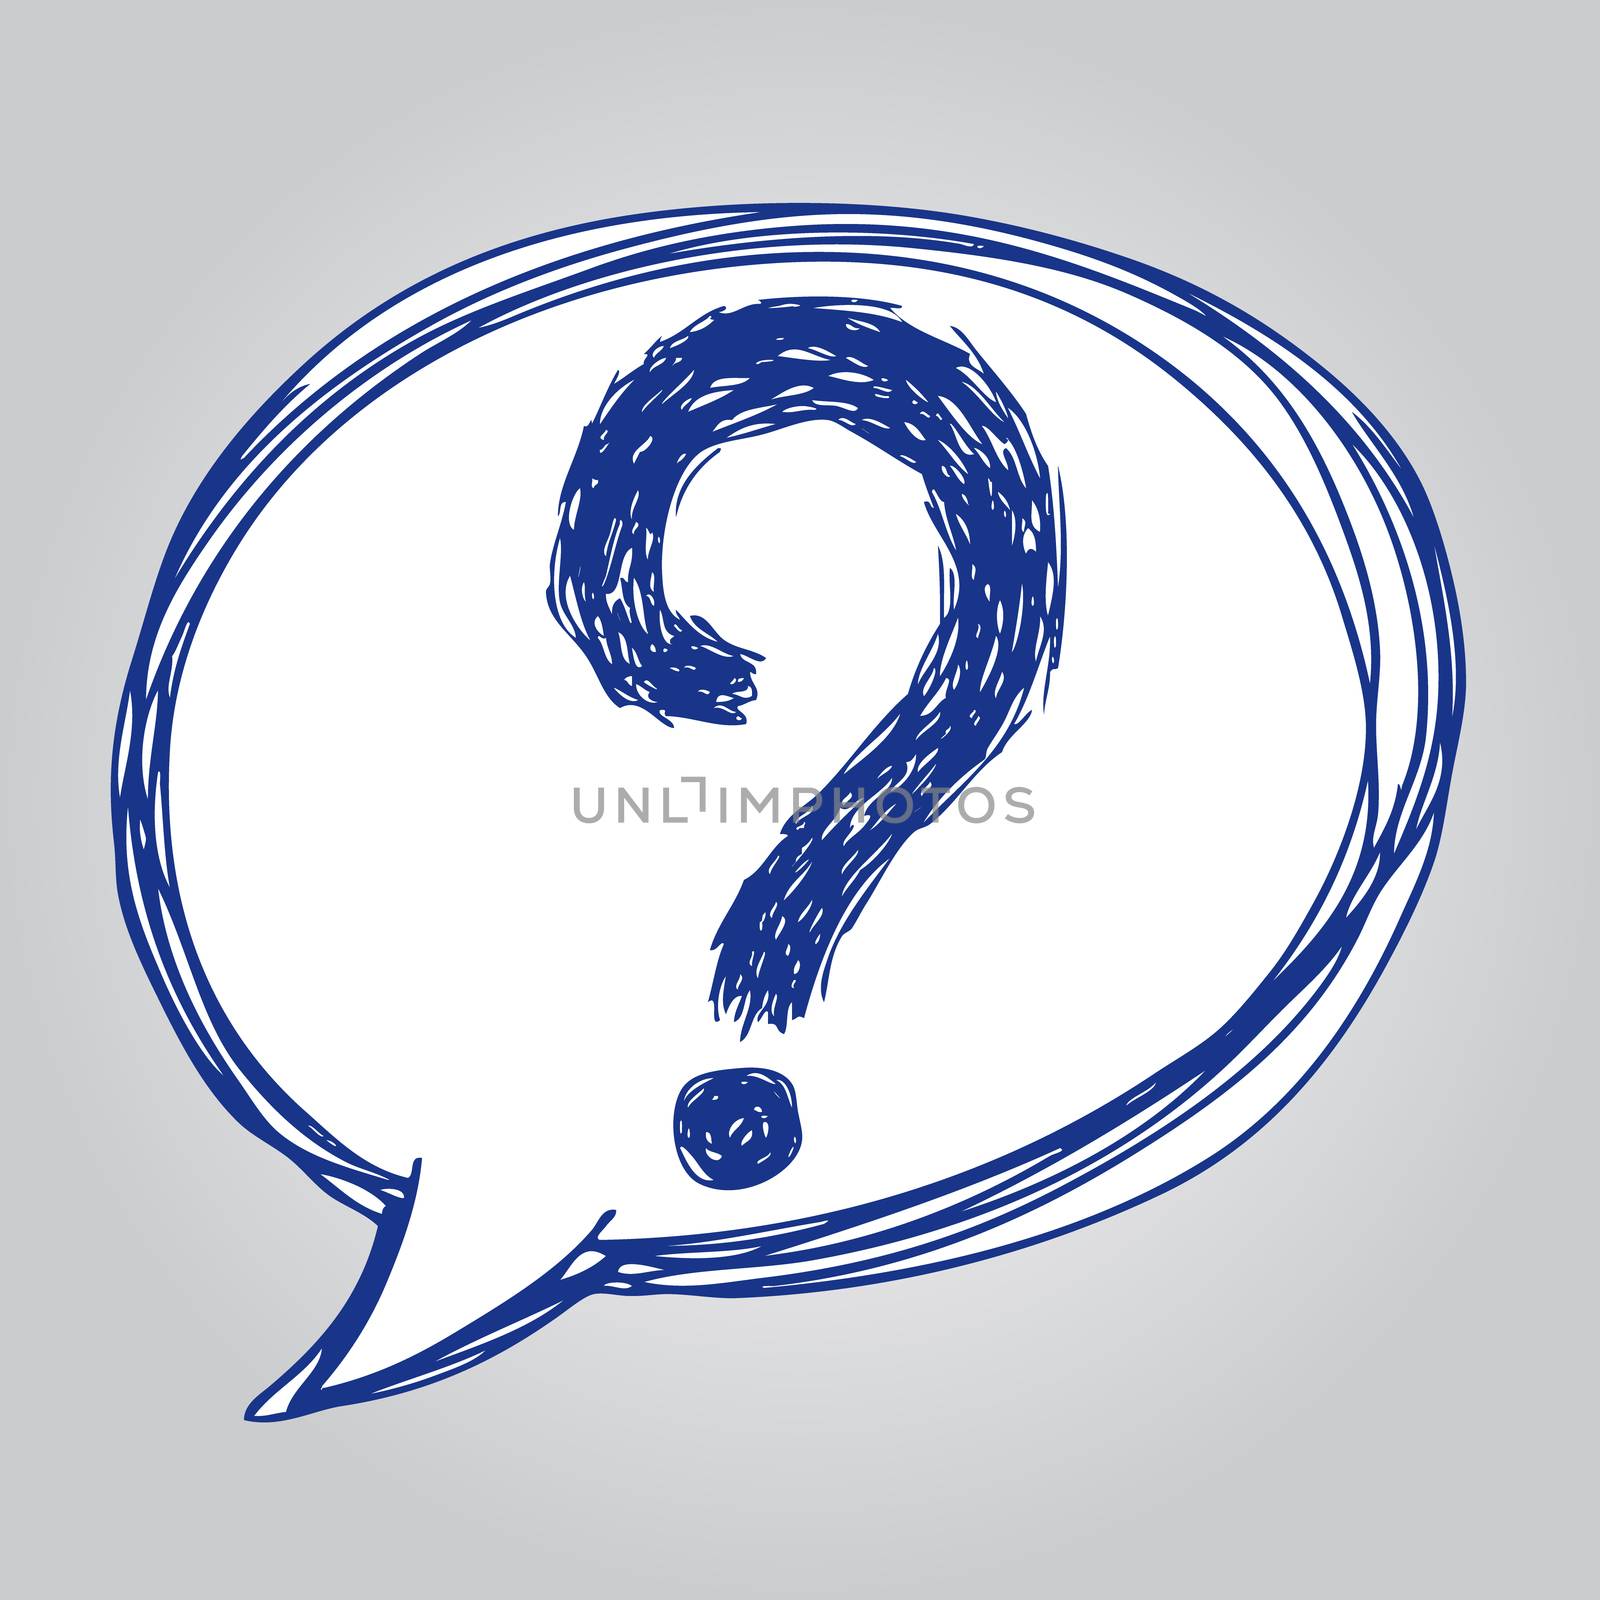 freehand sketch illustration of question marks in speech bubble icon, doodle hand drawn